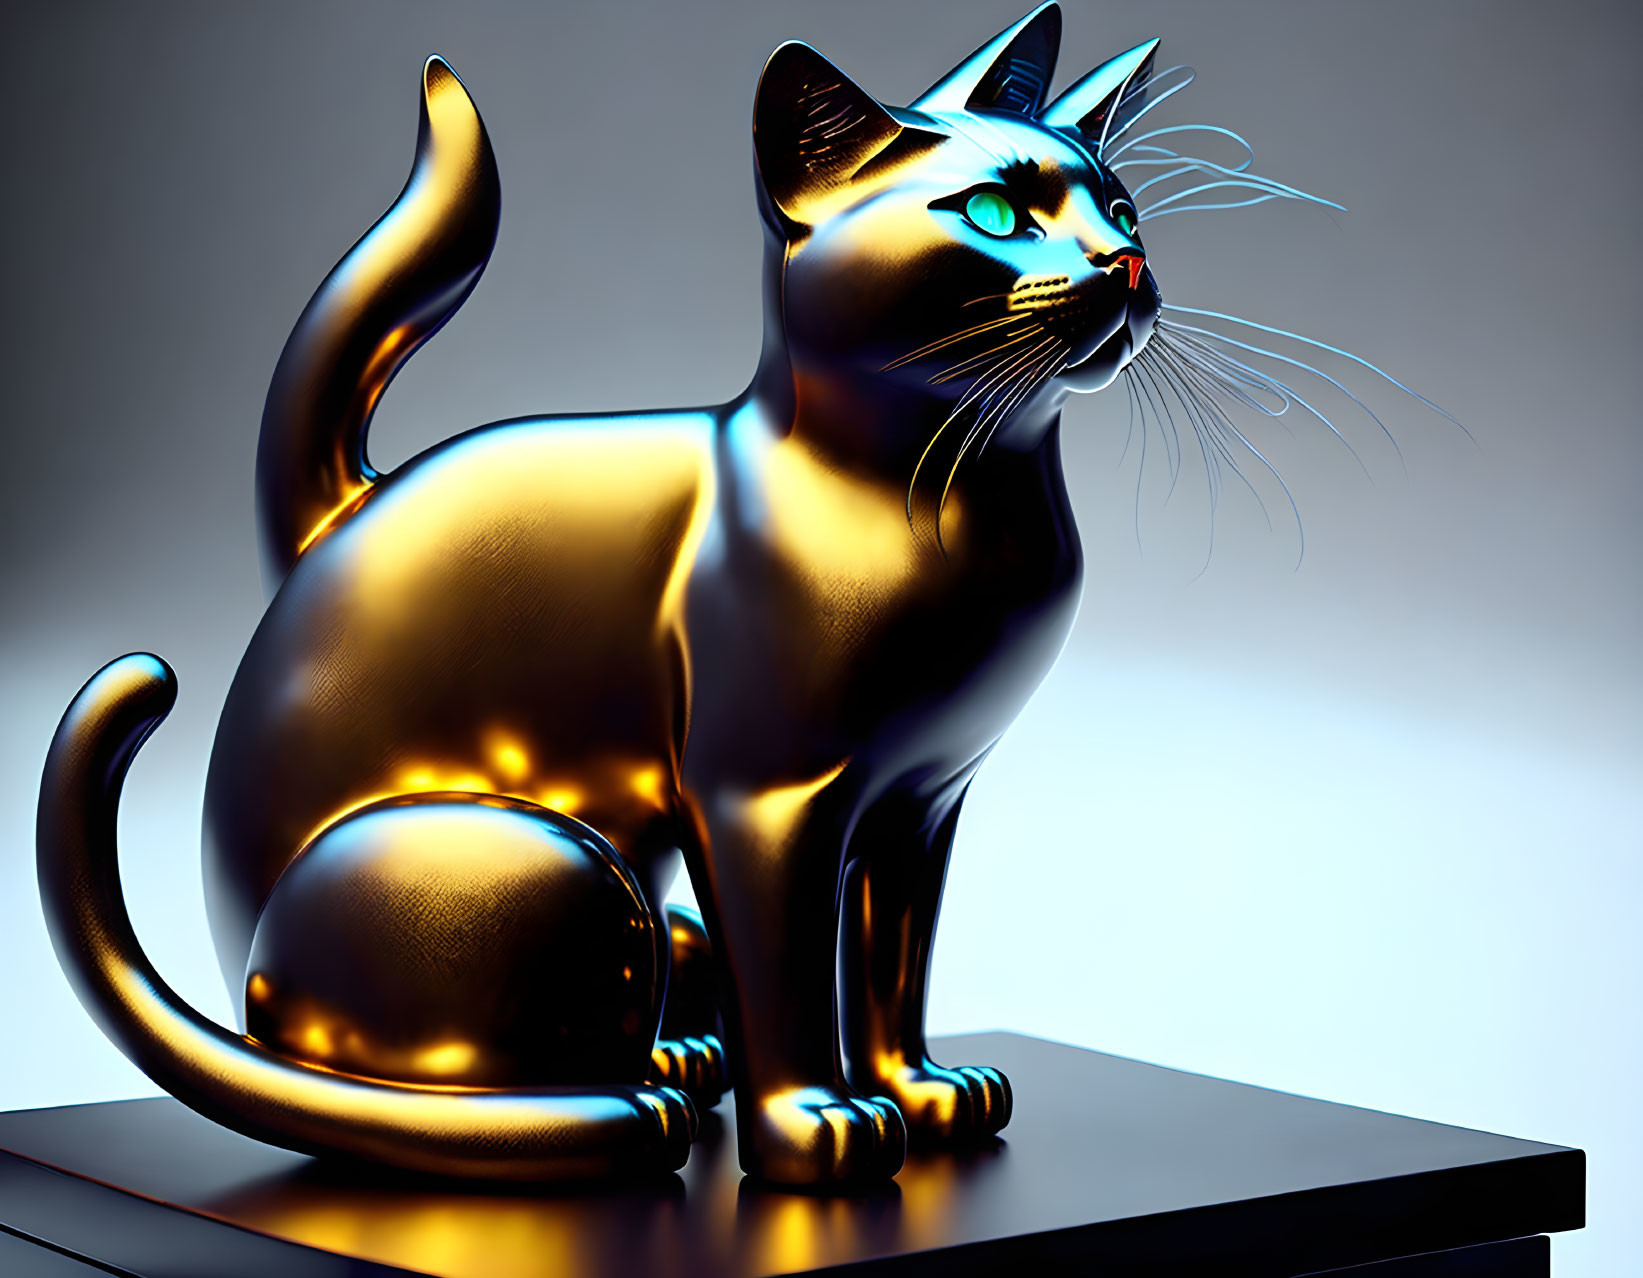 Shiny metallic cat sculpture with glowing blue eyes on dark background